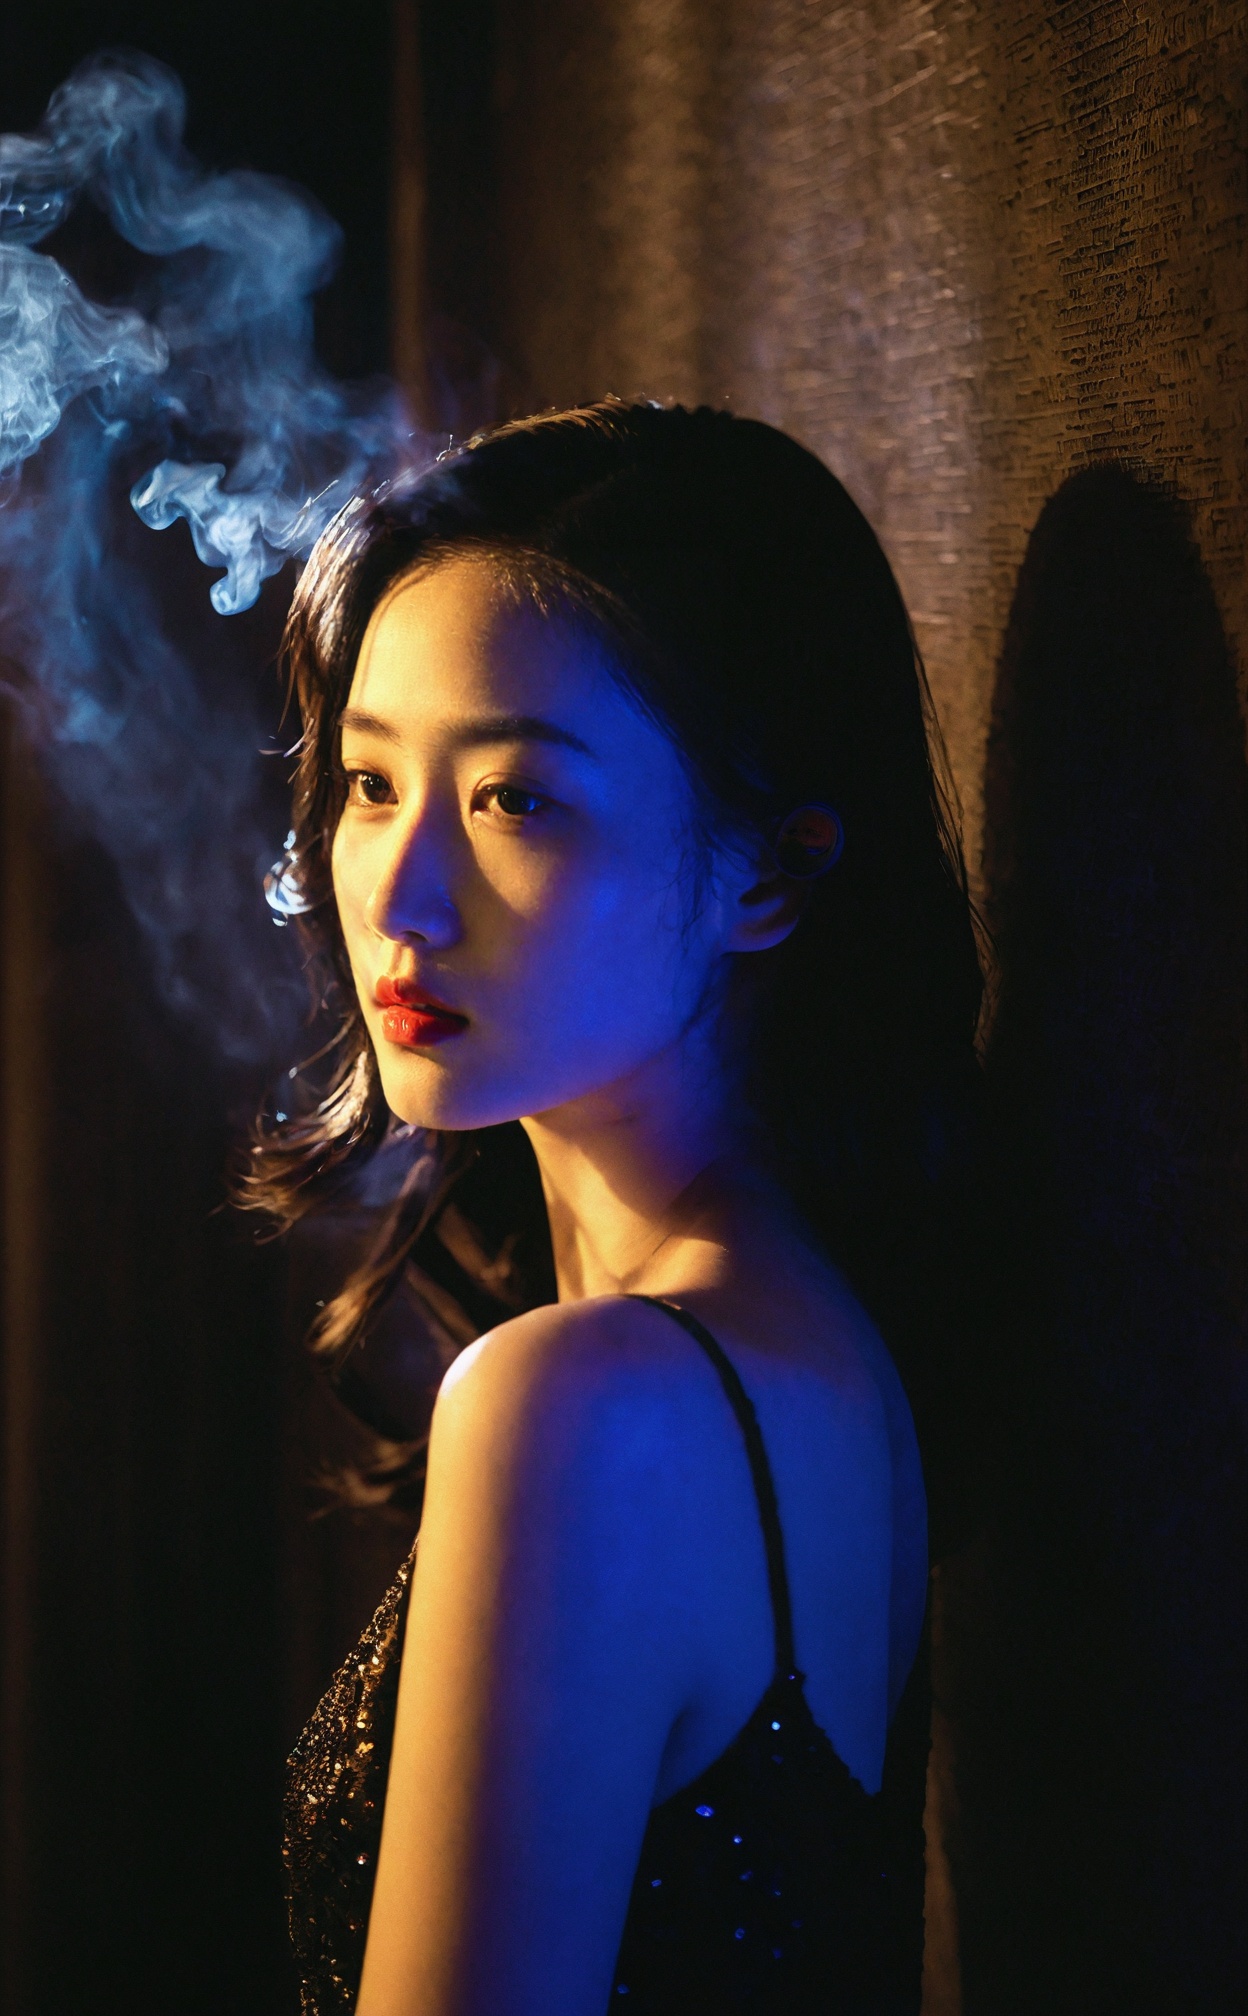 Timeless film portrayal of a femme fatale, bathed in cinematic elegance, standing alone in a smoky, mysterious setting, with a detailed face hinting at a web of intrigue.korean girl,black hair,mugglelight,